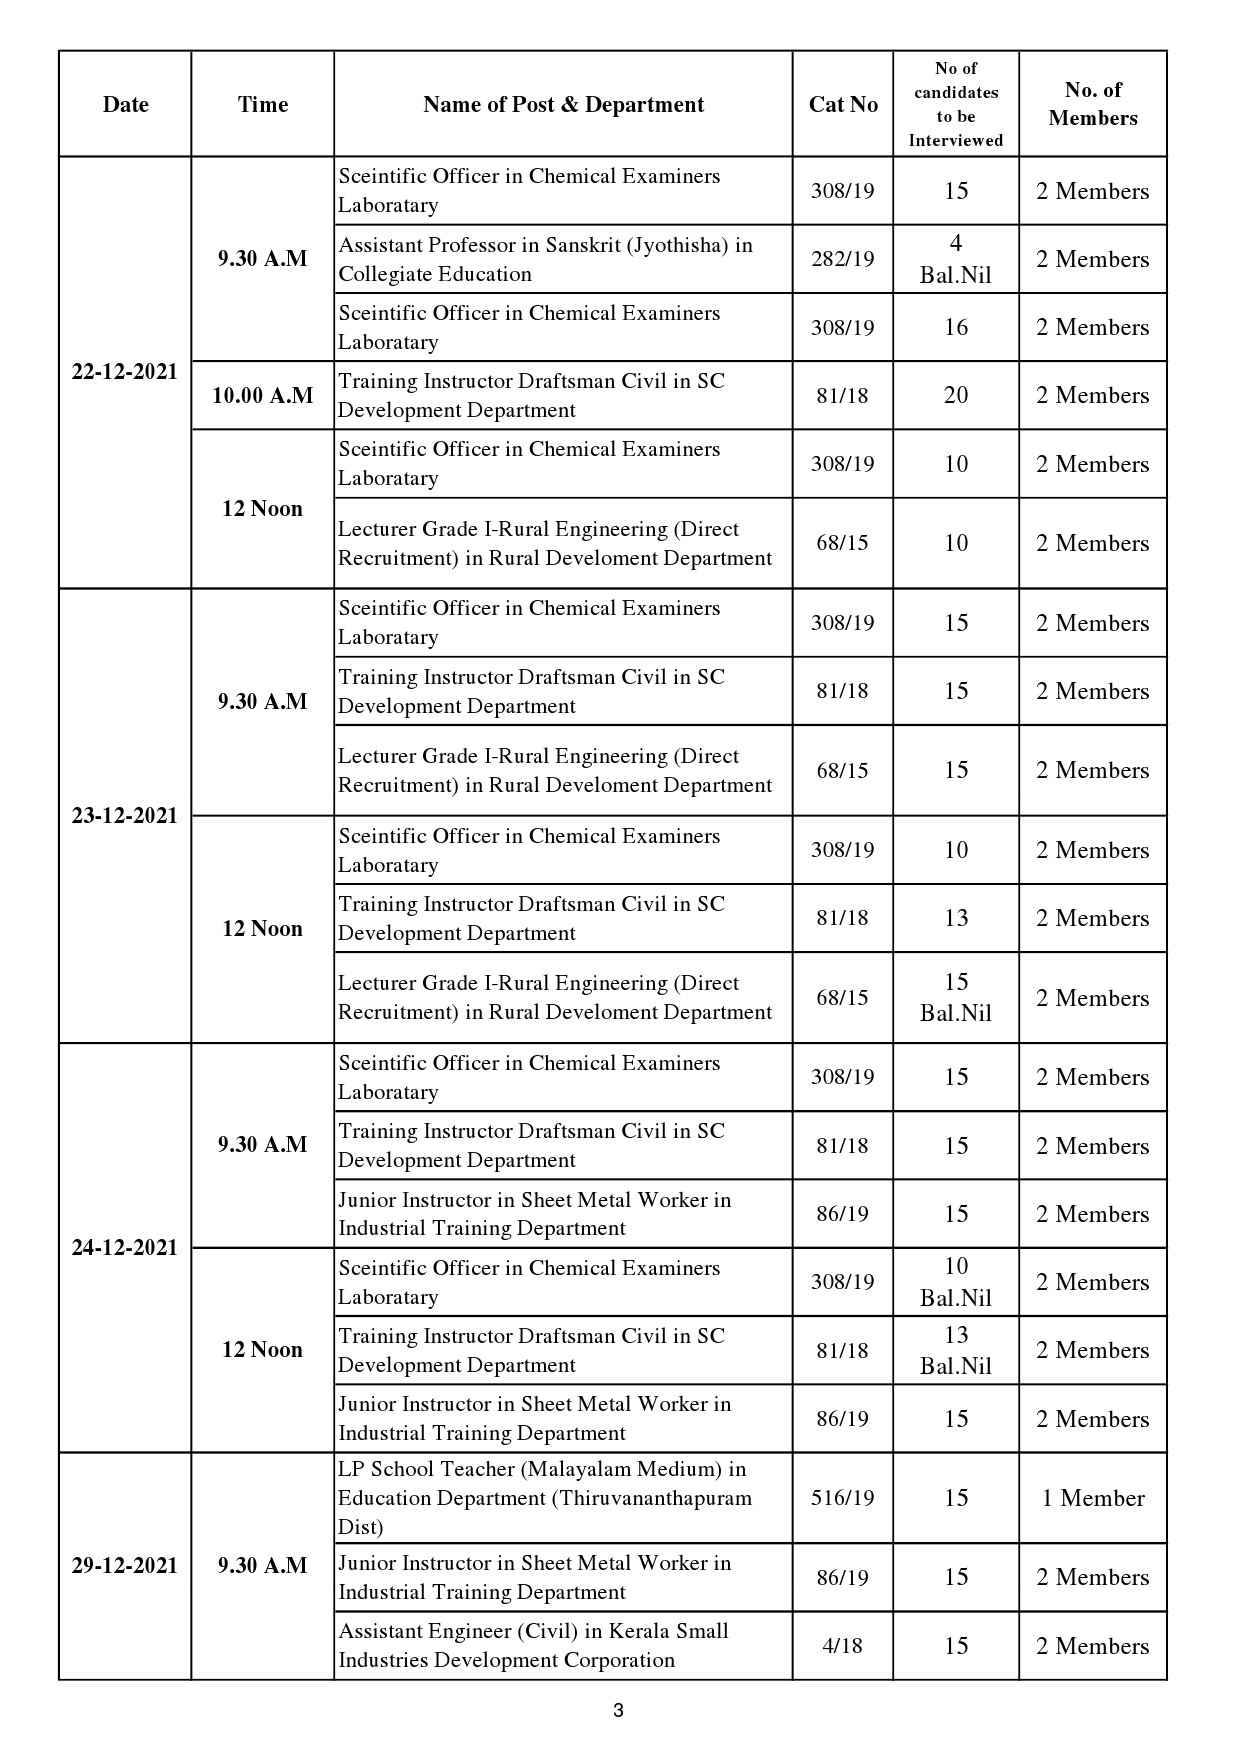 KPSC Interview Programme For The Month Of December 2021 - Notification Image 3